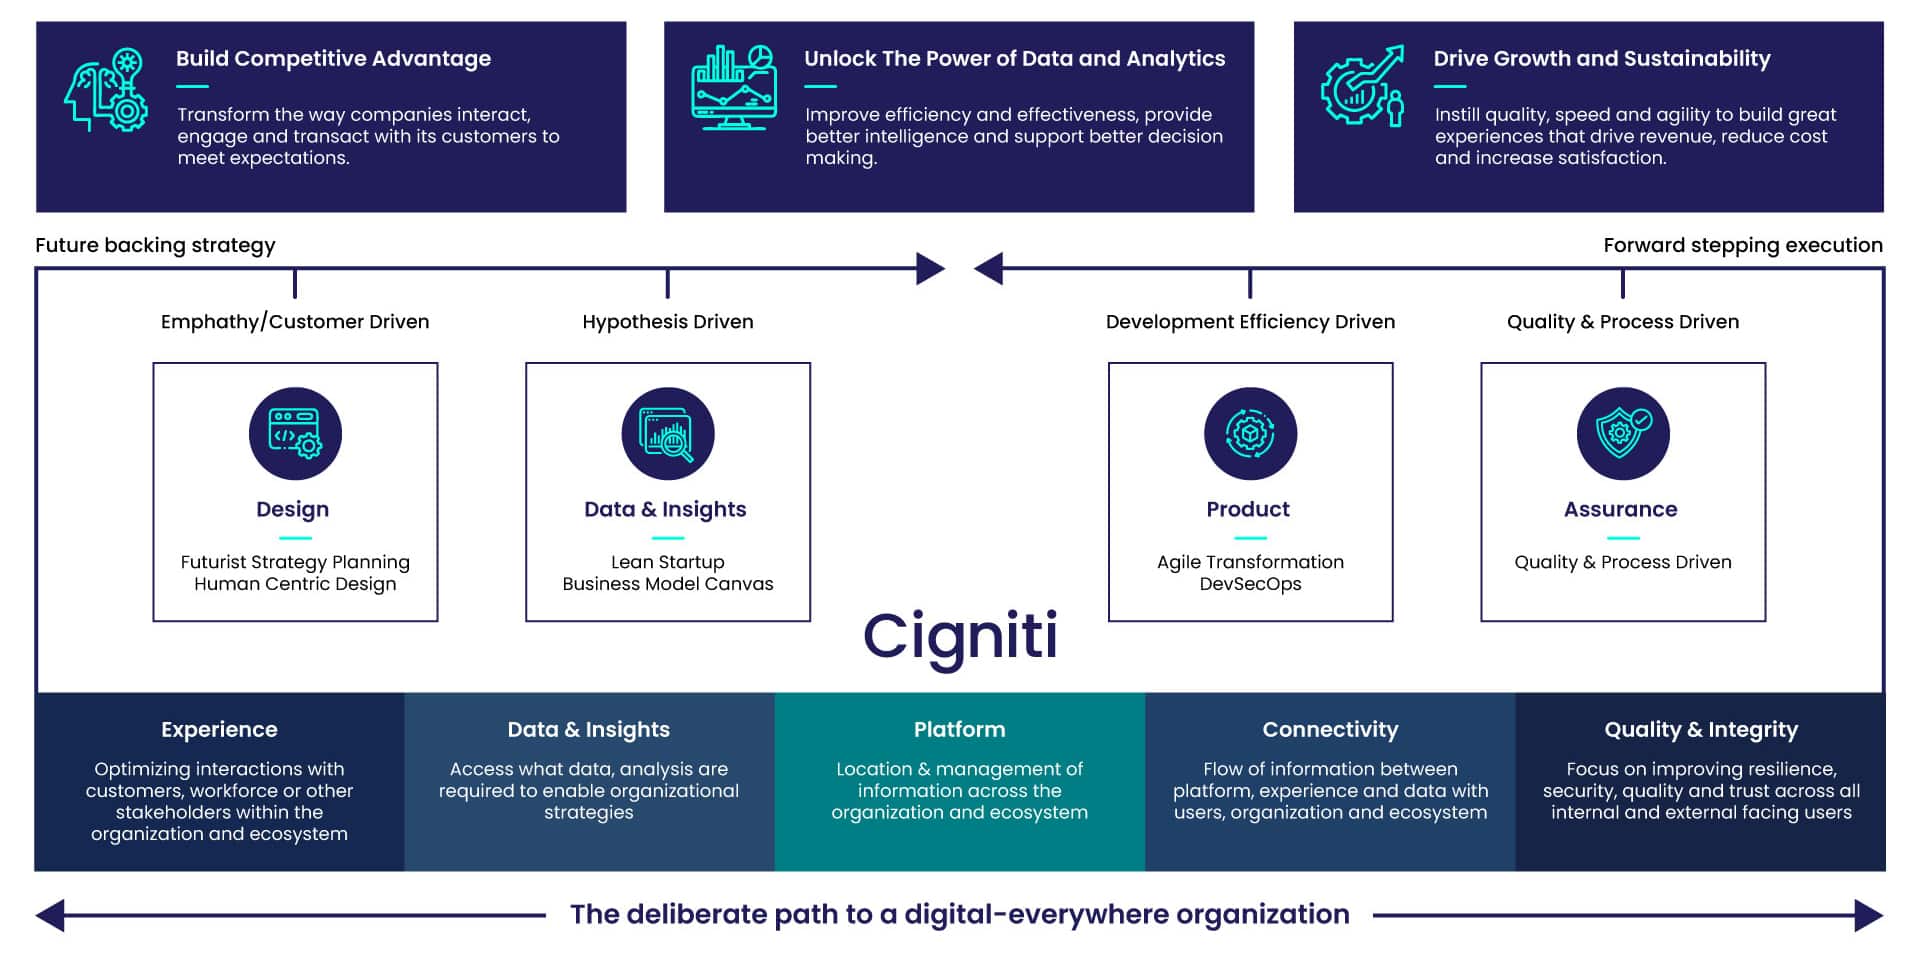 The deliberate path to a digital-everywhere organization